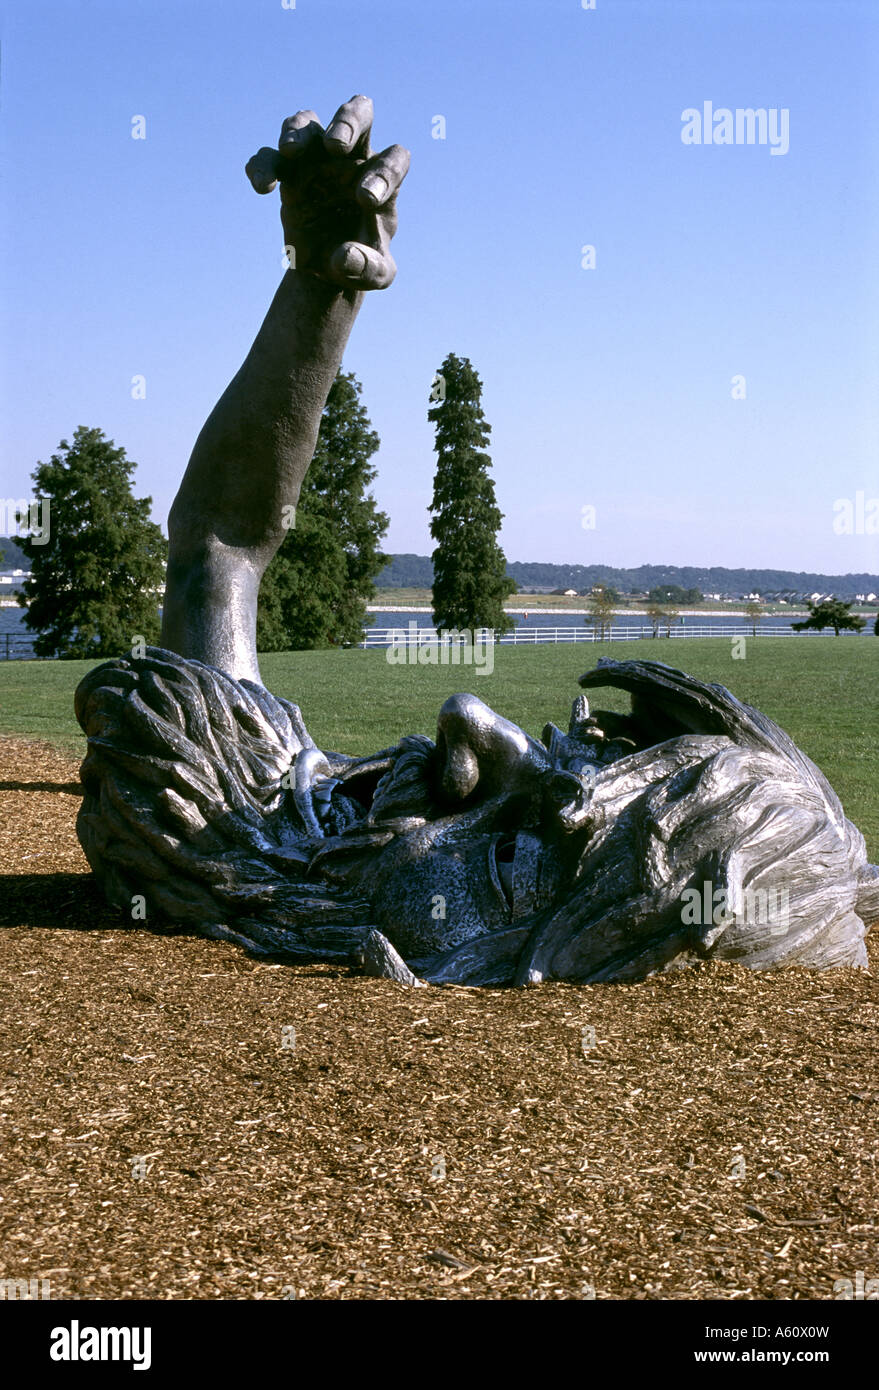 The Awakening Sculpture High Resolution Stock Photography And Images Alamy